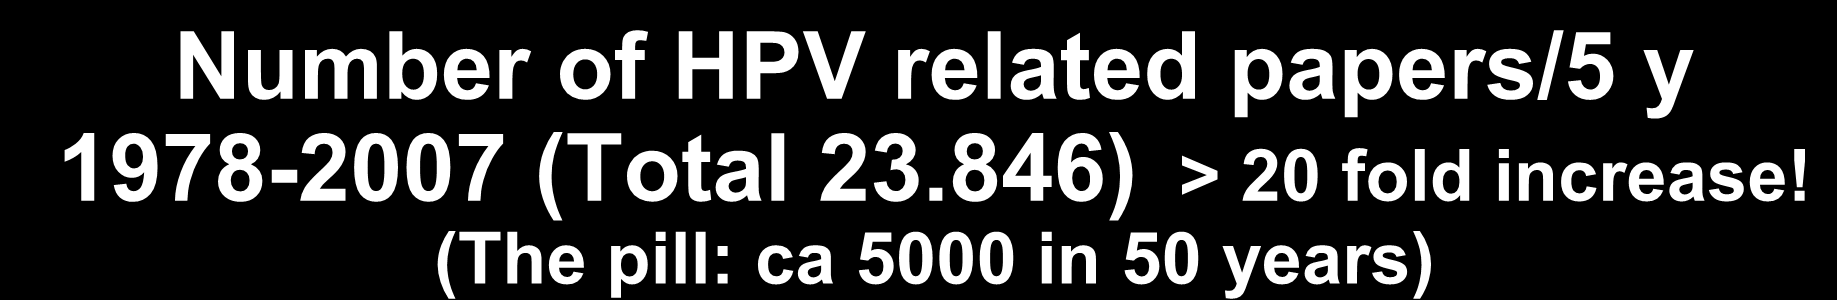 Number of HPV related papers/5 y 1978-2007 (Total 23.846) > 20 fold increase!